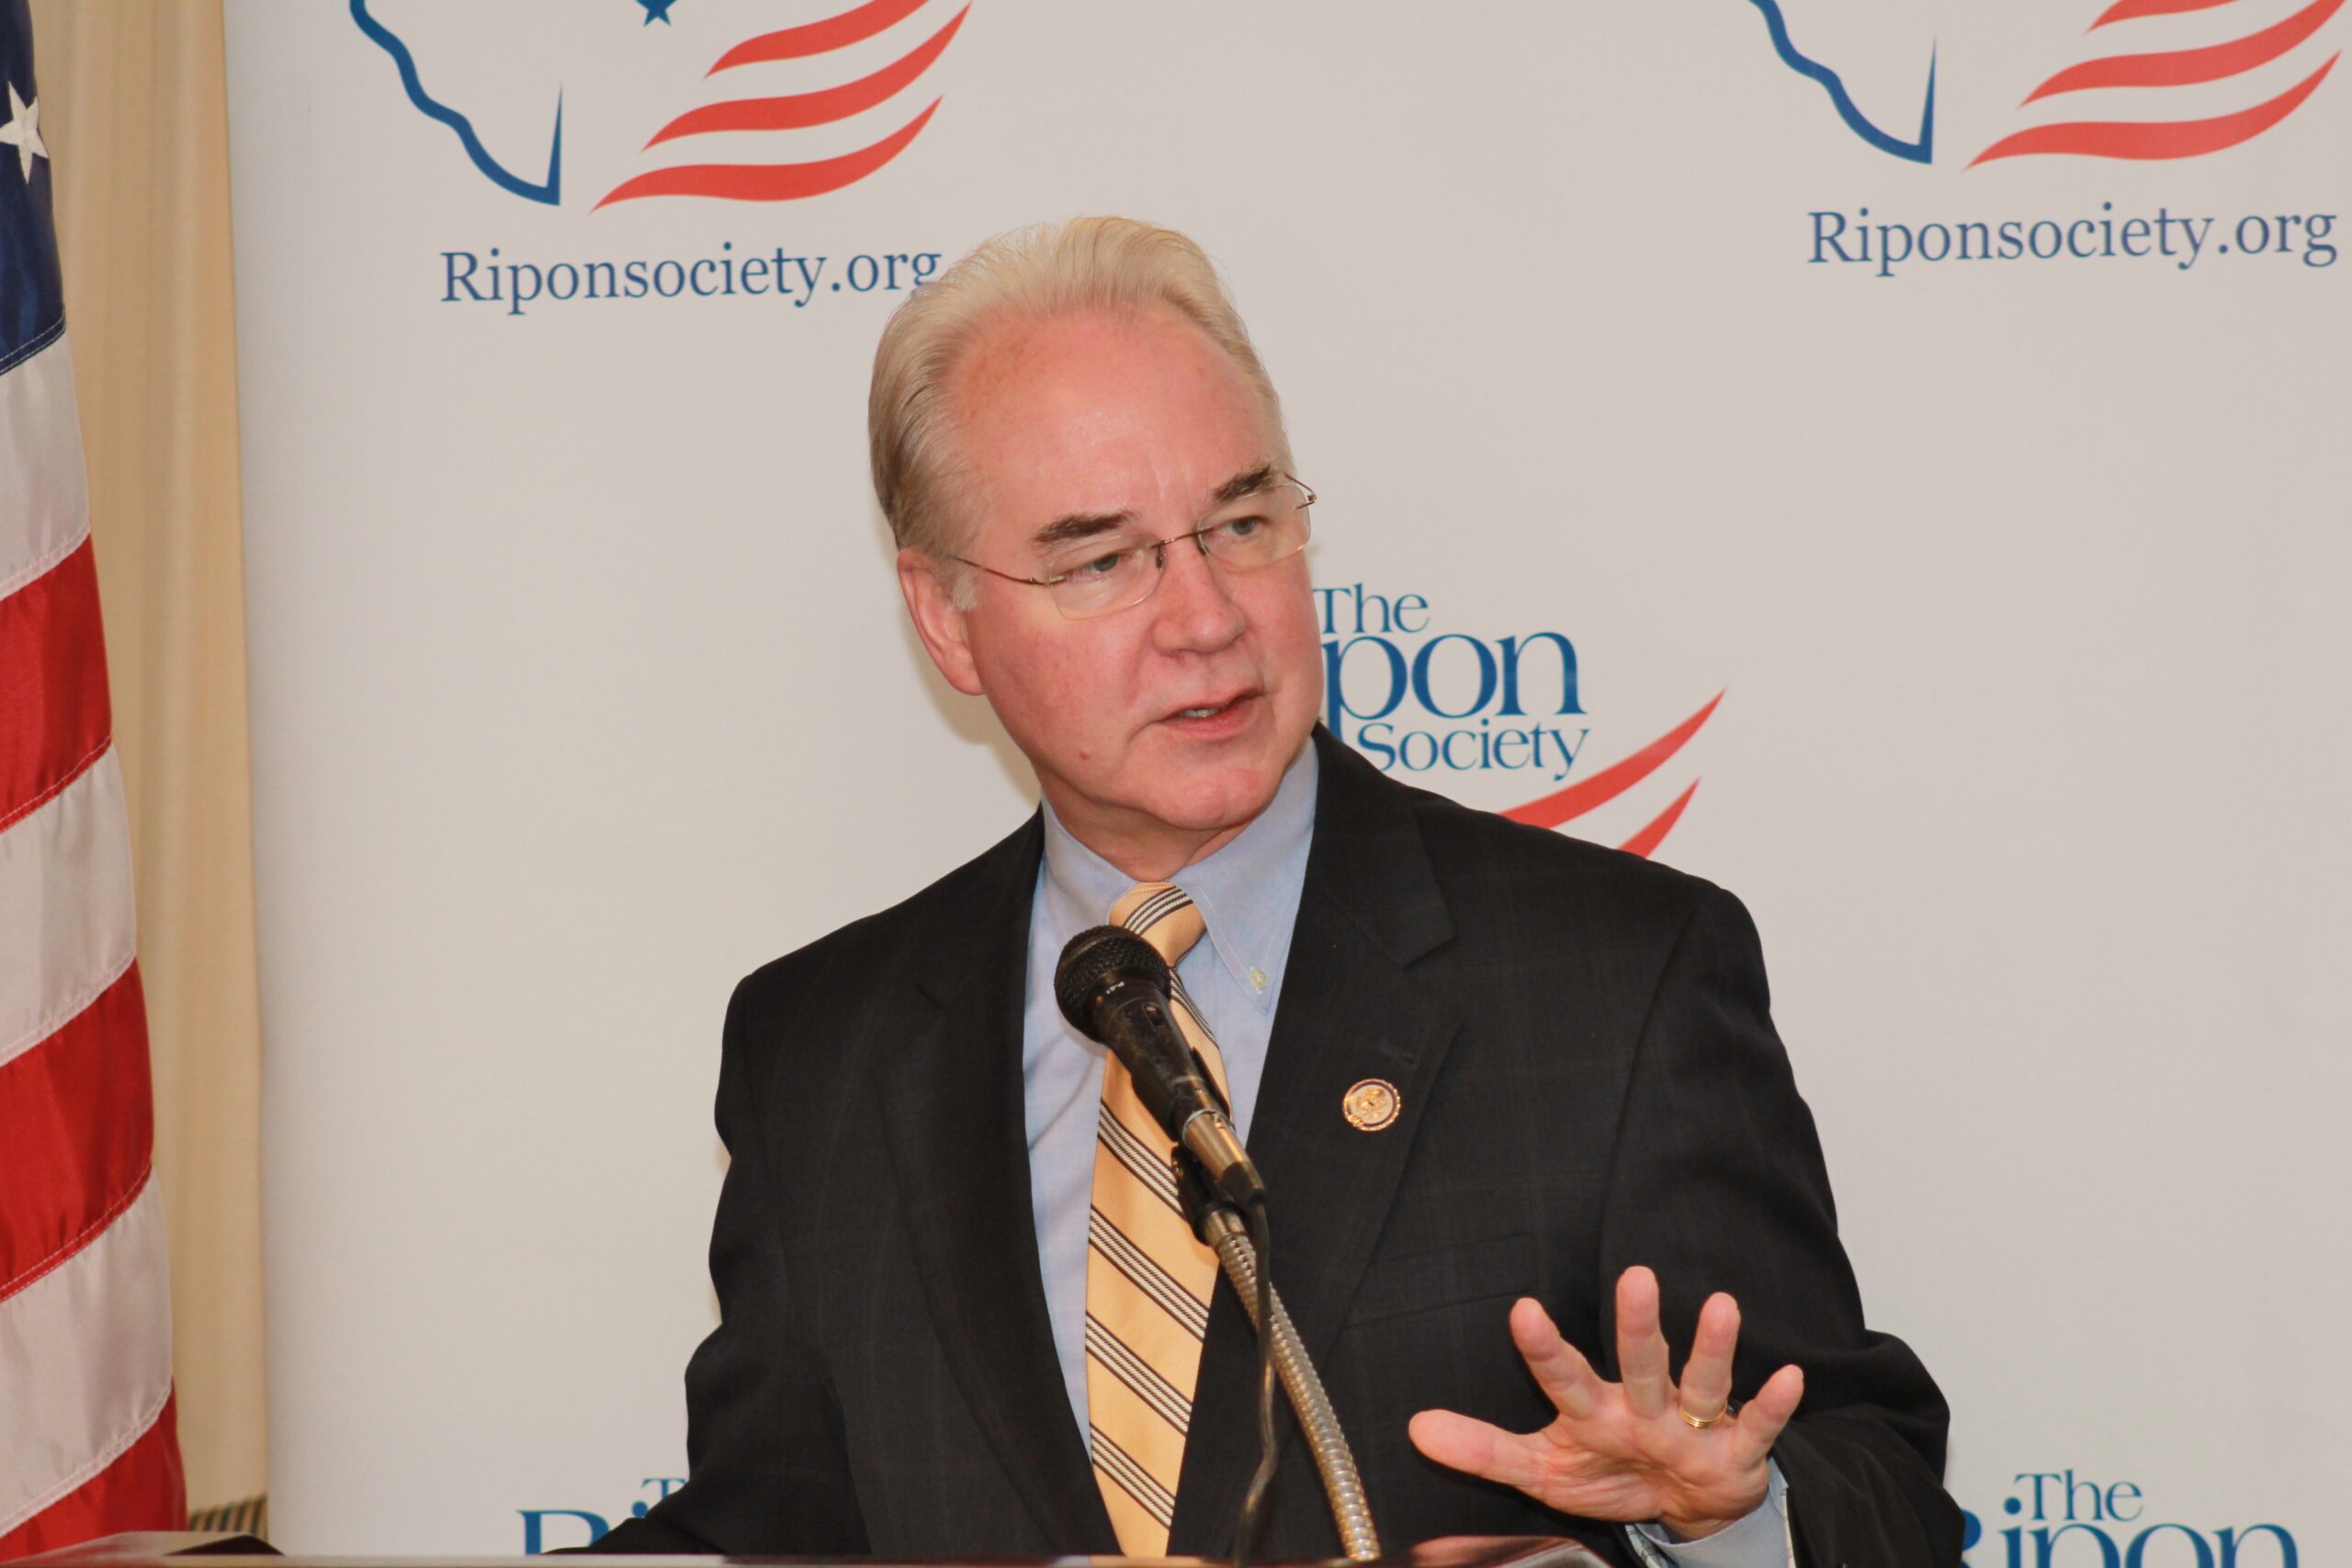 Price Touts the Importance of Having a Positive Agenda this Fall